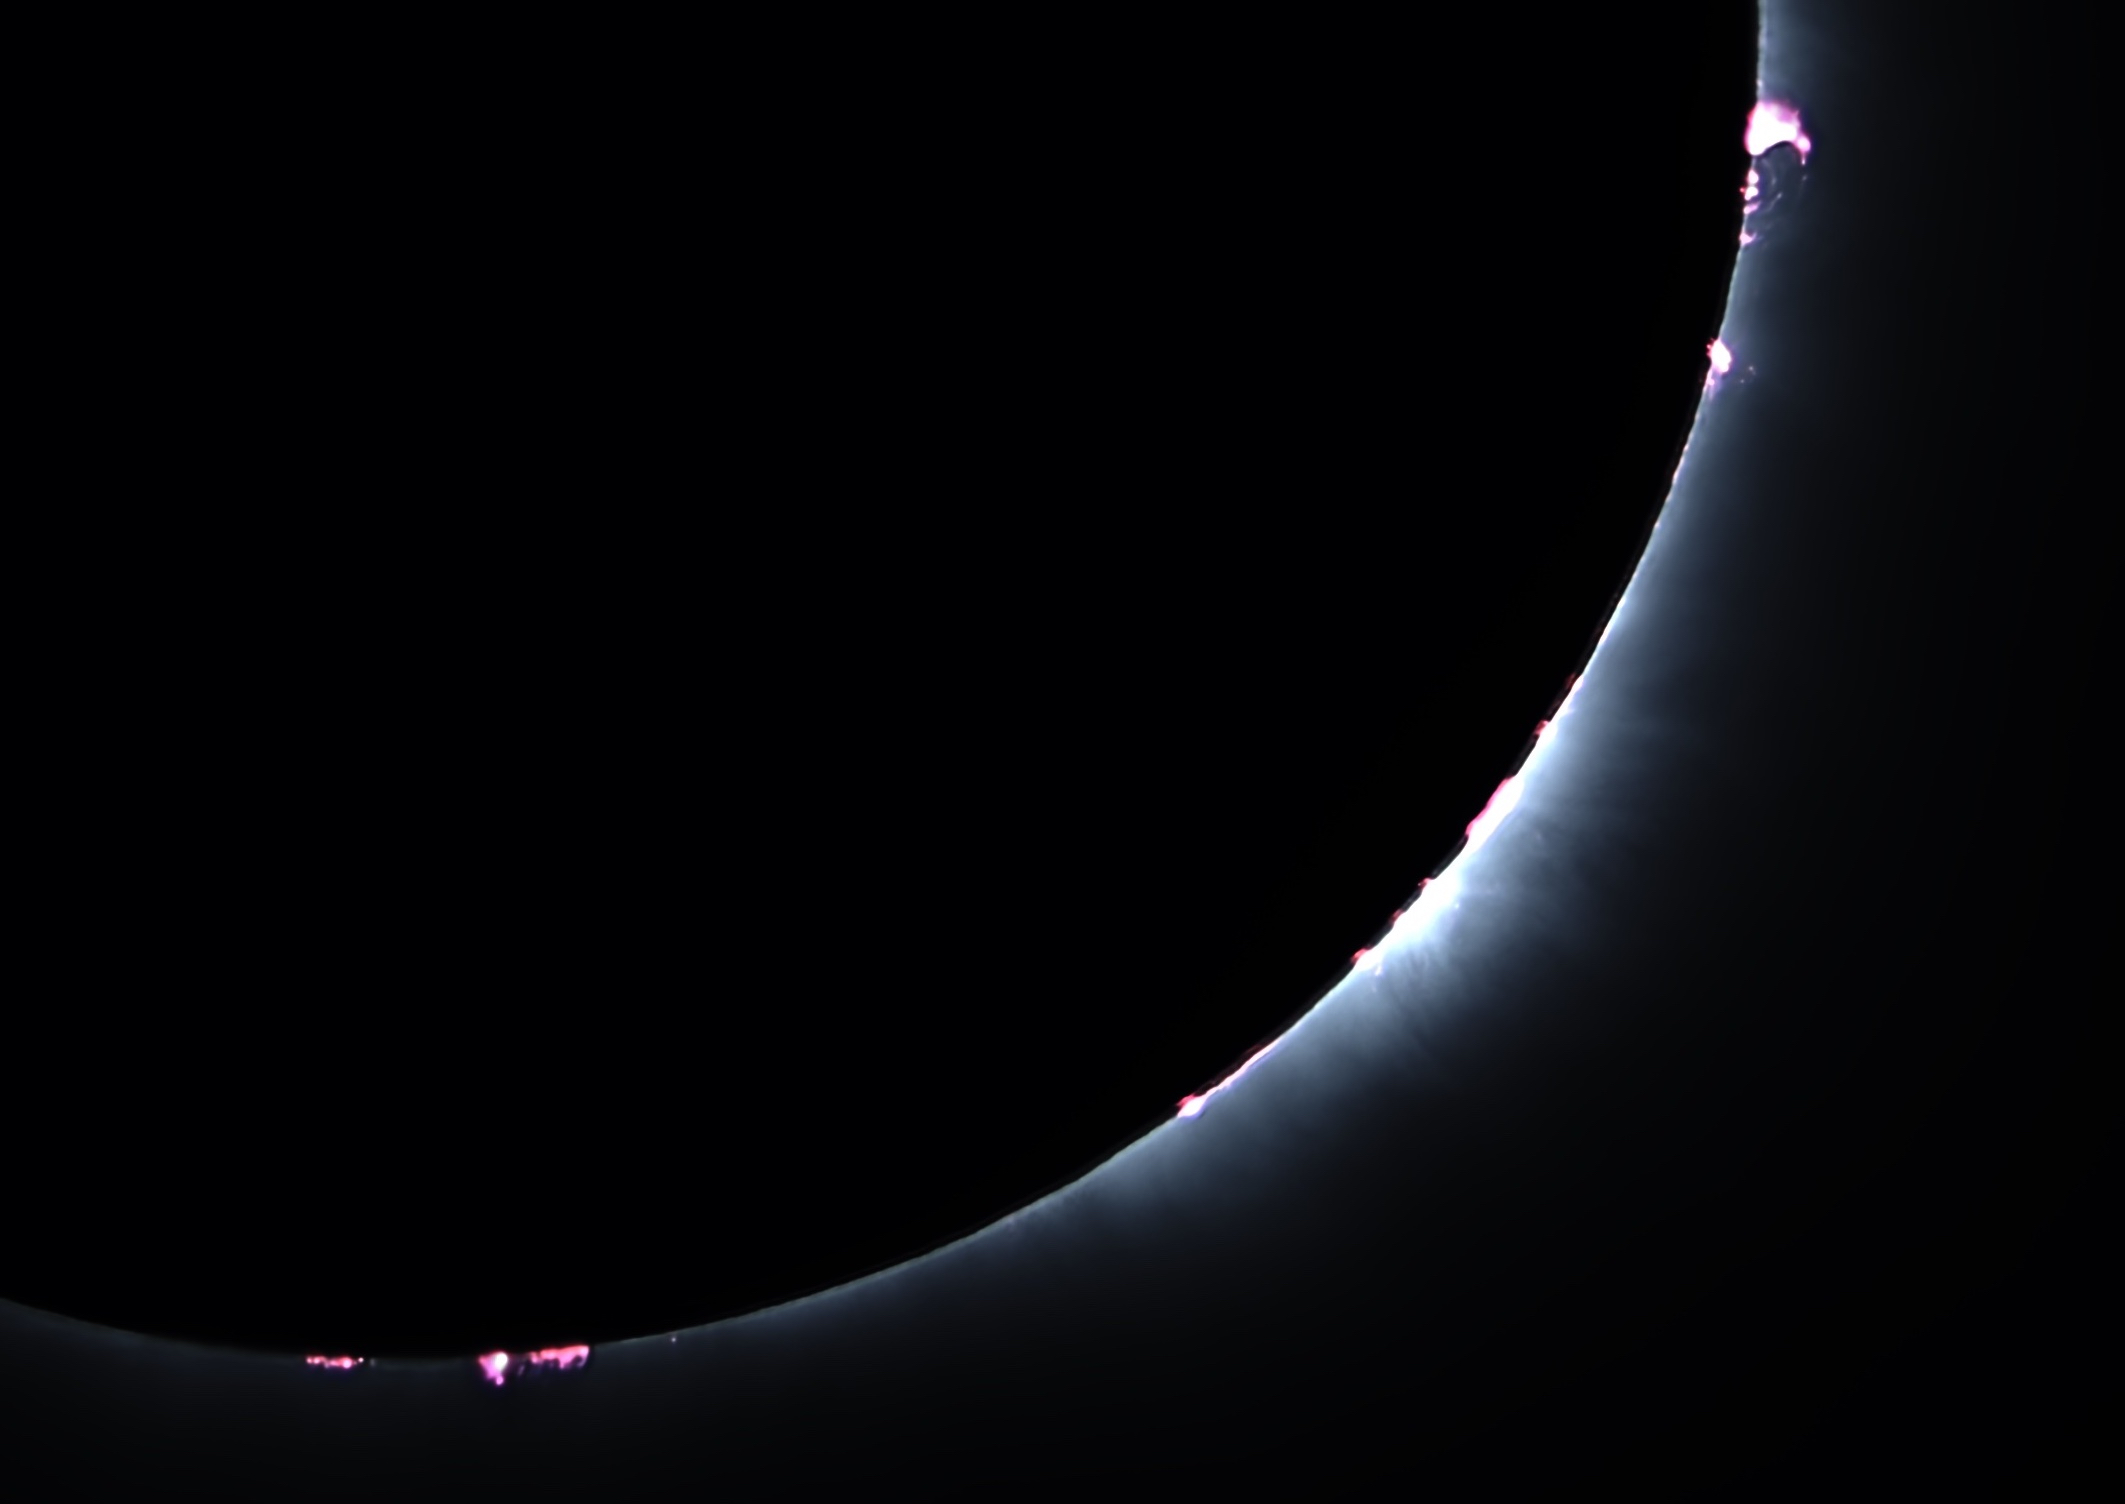 This is one of the photos the students took during the recent eclipse, which displays two phenomena they had researched before the event: Prominences and Baily’s Beads.